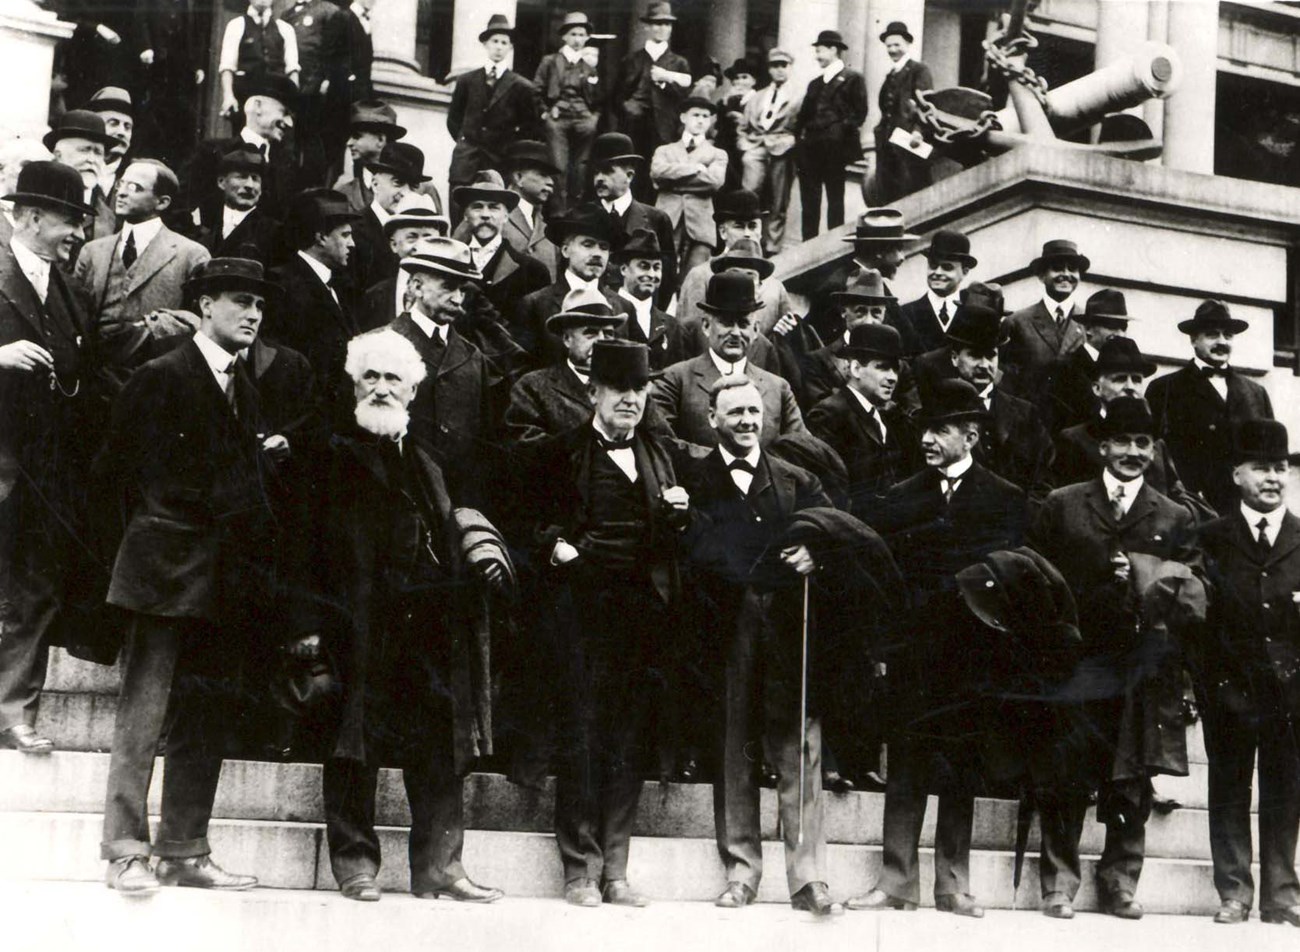 Edison with the Naval Consulting Board on the east steps of the State, War and Navy Building, October 7, 1915. Navy Secretary Josephus Daniels stands to Edison’s left. Assistant Navy Secretary Franklin D. Roosevelt is in the front row, far left.